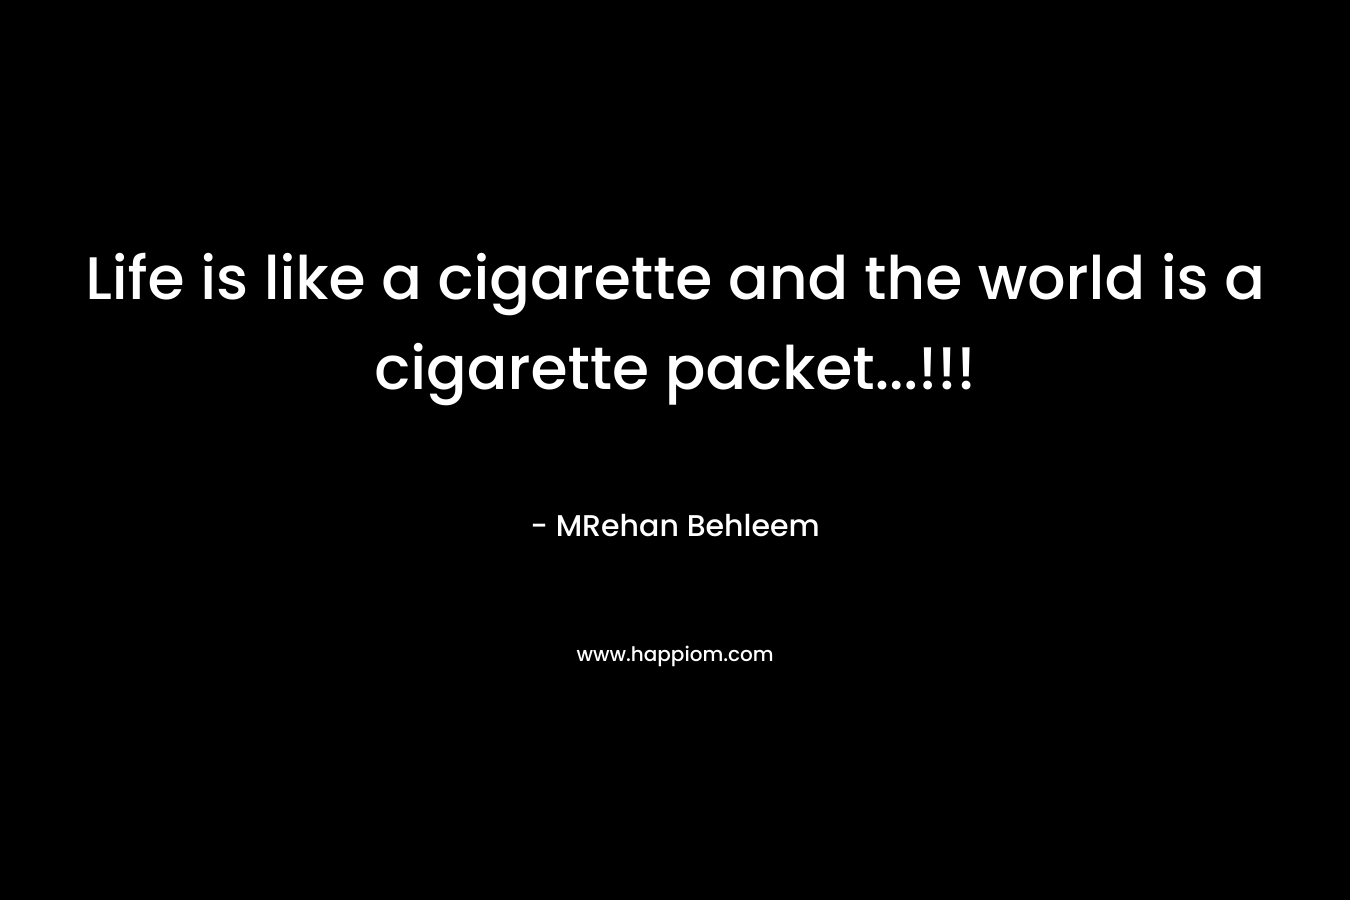 Life is like a cigarette and the world is a cigarette packet...!!!